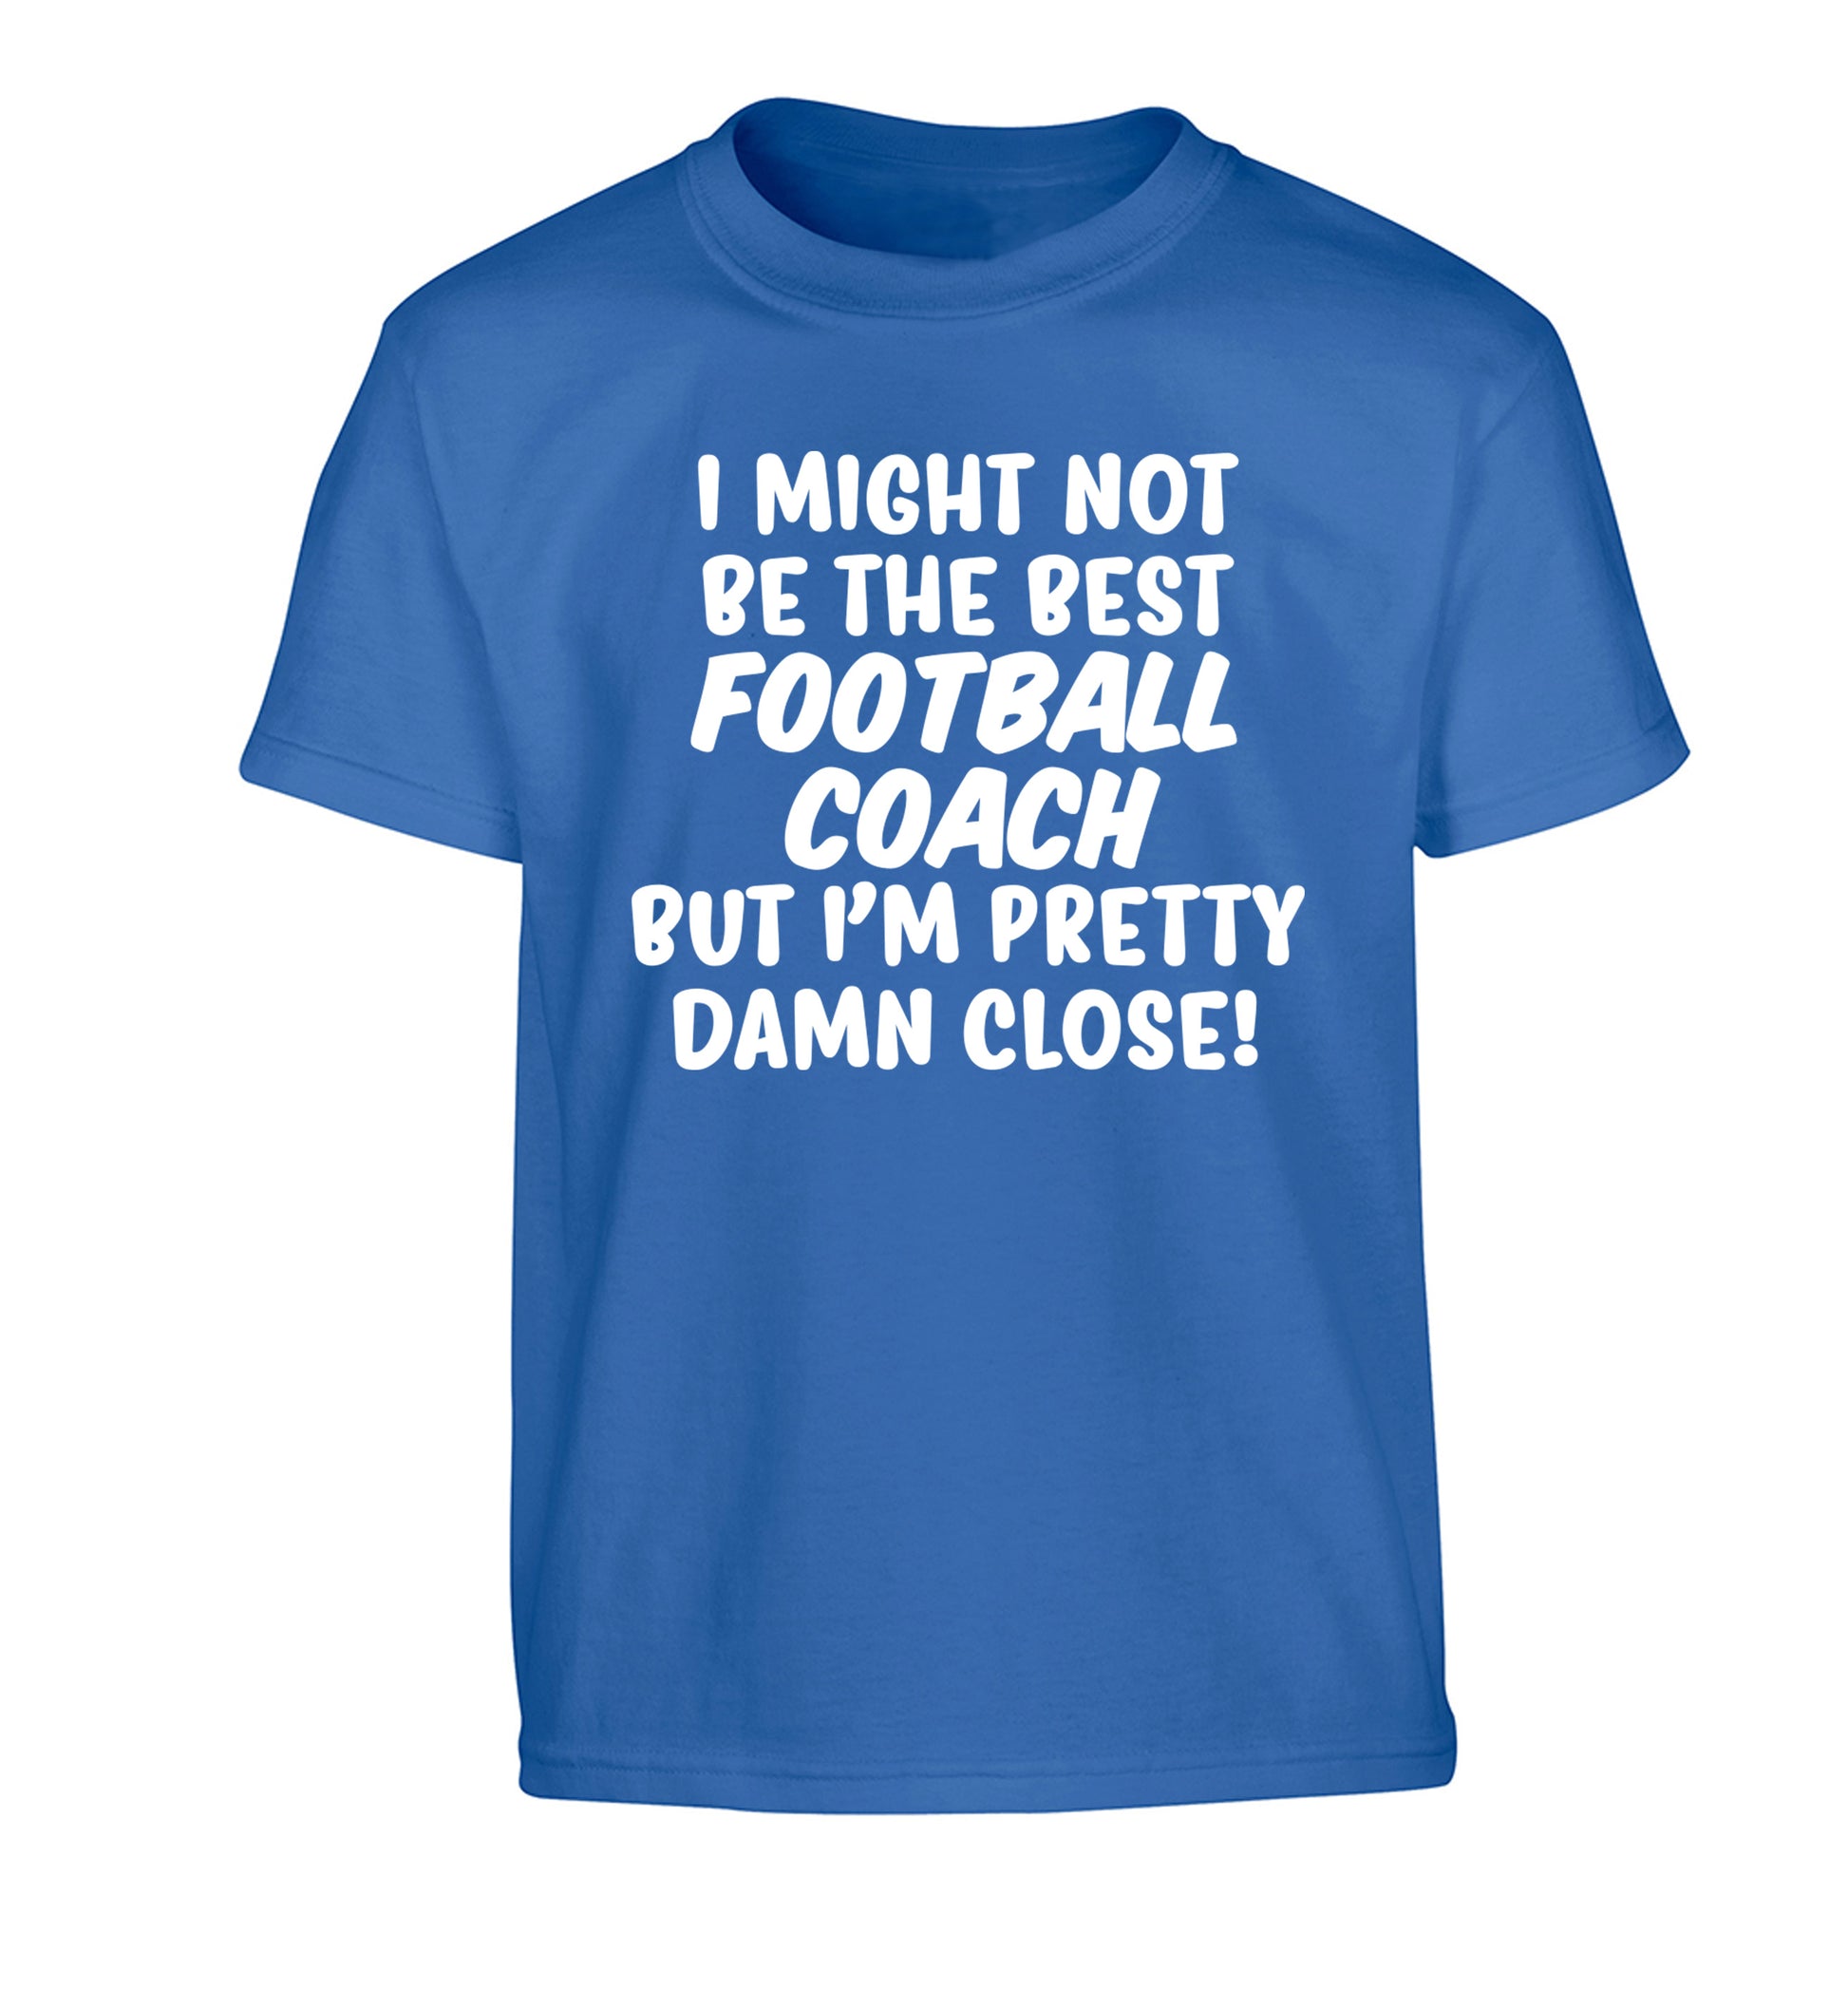 I might not be the best football coach but I'm pretty close! Children's blue Tshirt 12-14 Years